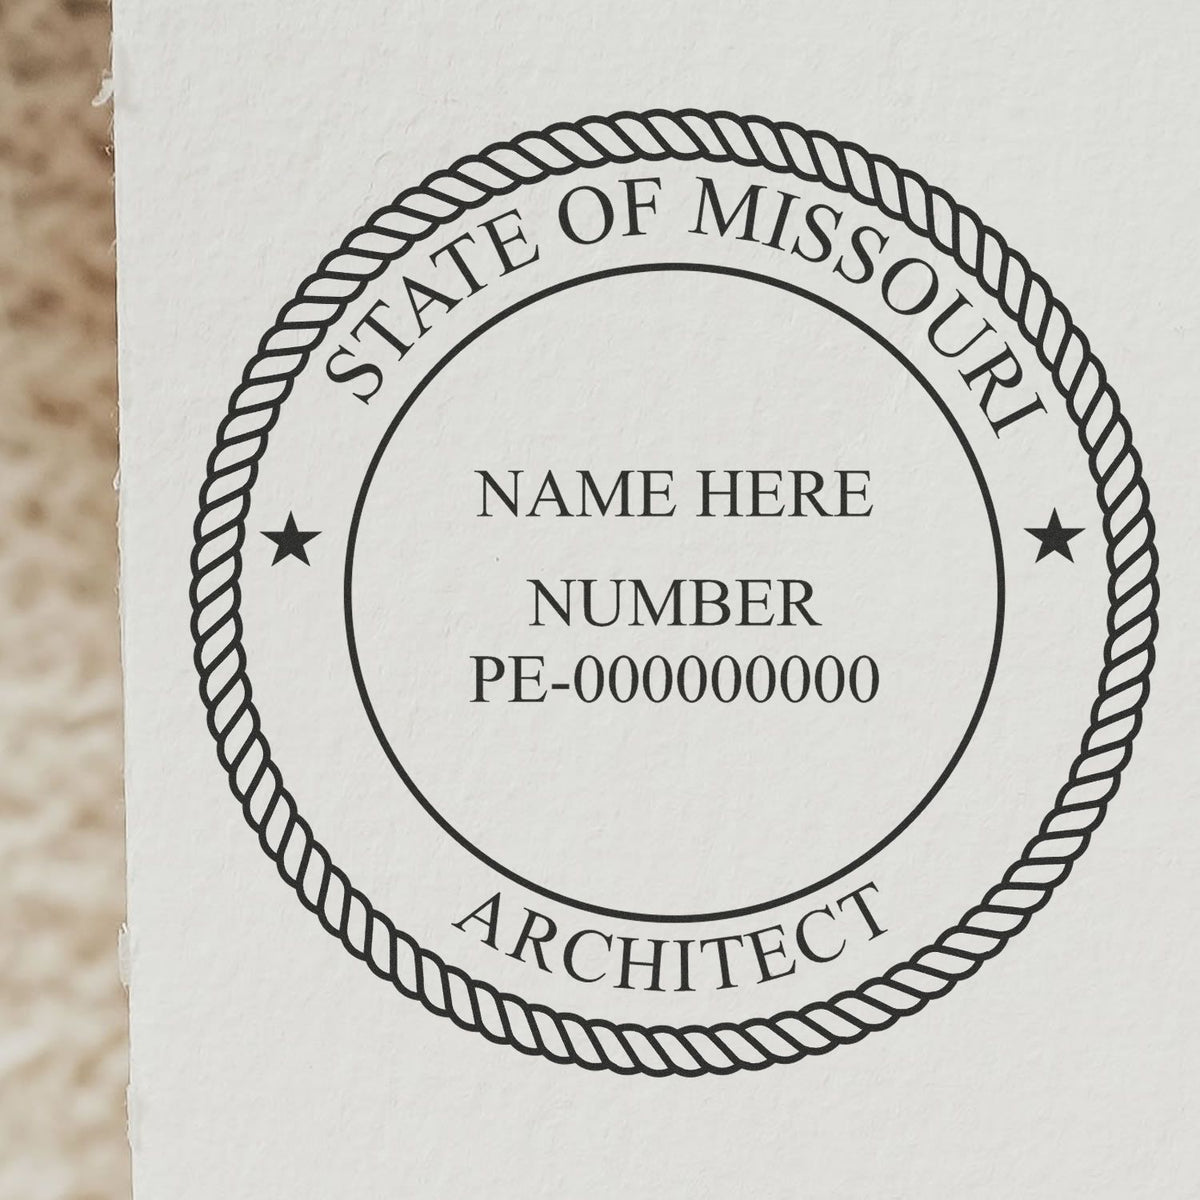 Slim Pre-Inked Missouri Architect Seal Stamp in use photo showing a stamped imprint of the Slim Pre-Inked Missouri Architect Seal Stamp